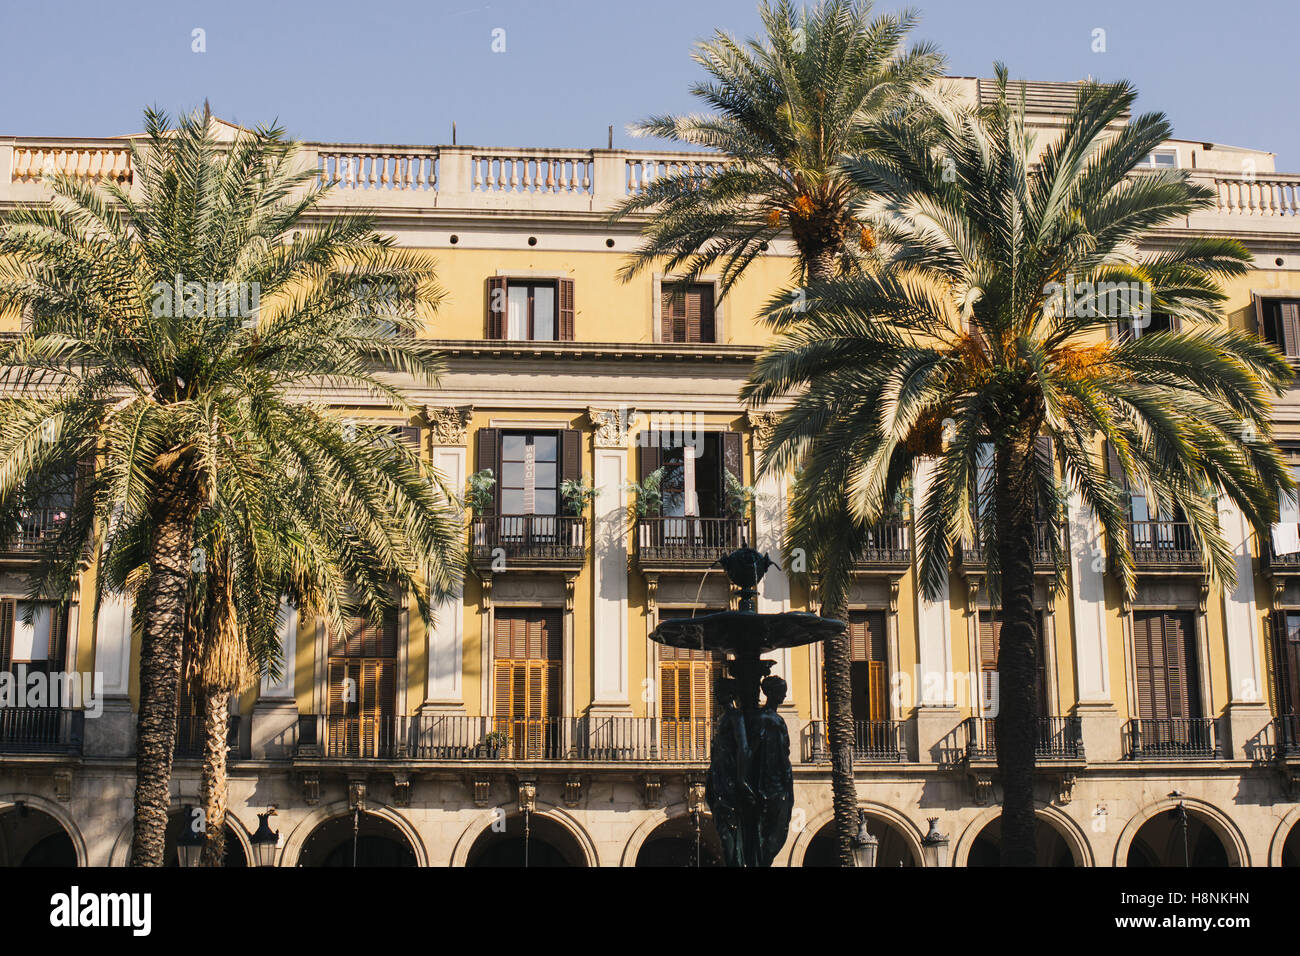 A building and palm trees on the Placa Reial in Barcelona, Spain. Stock Photo